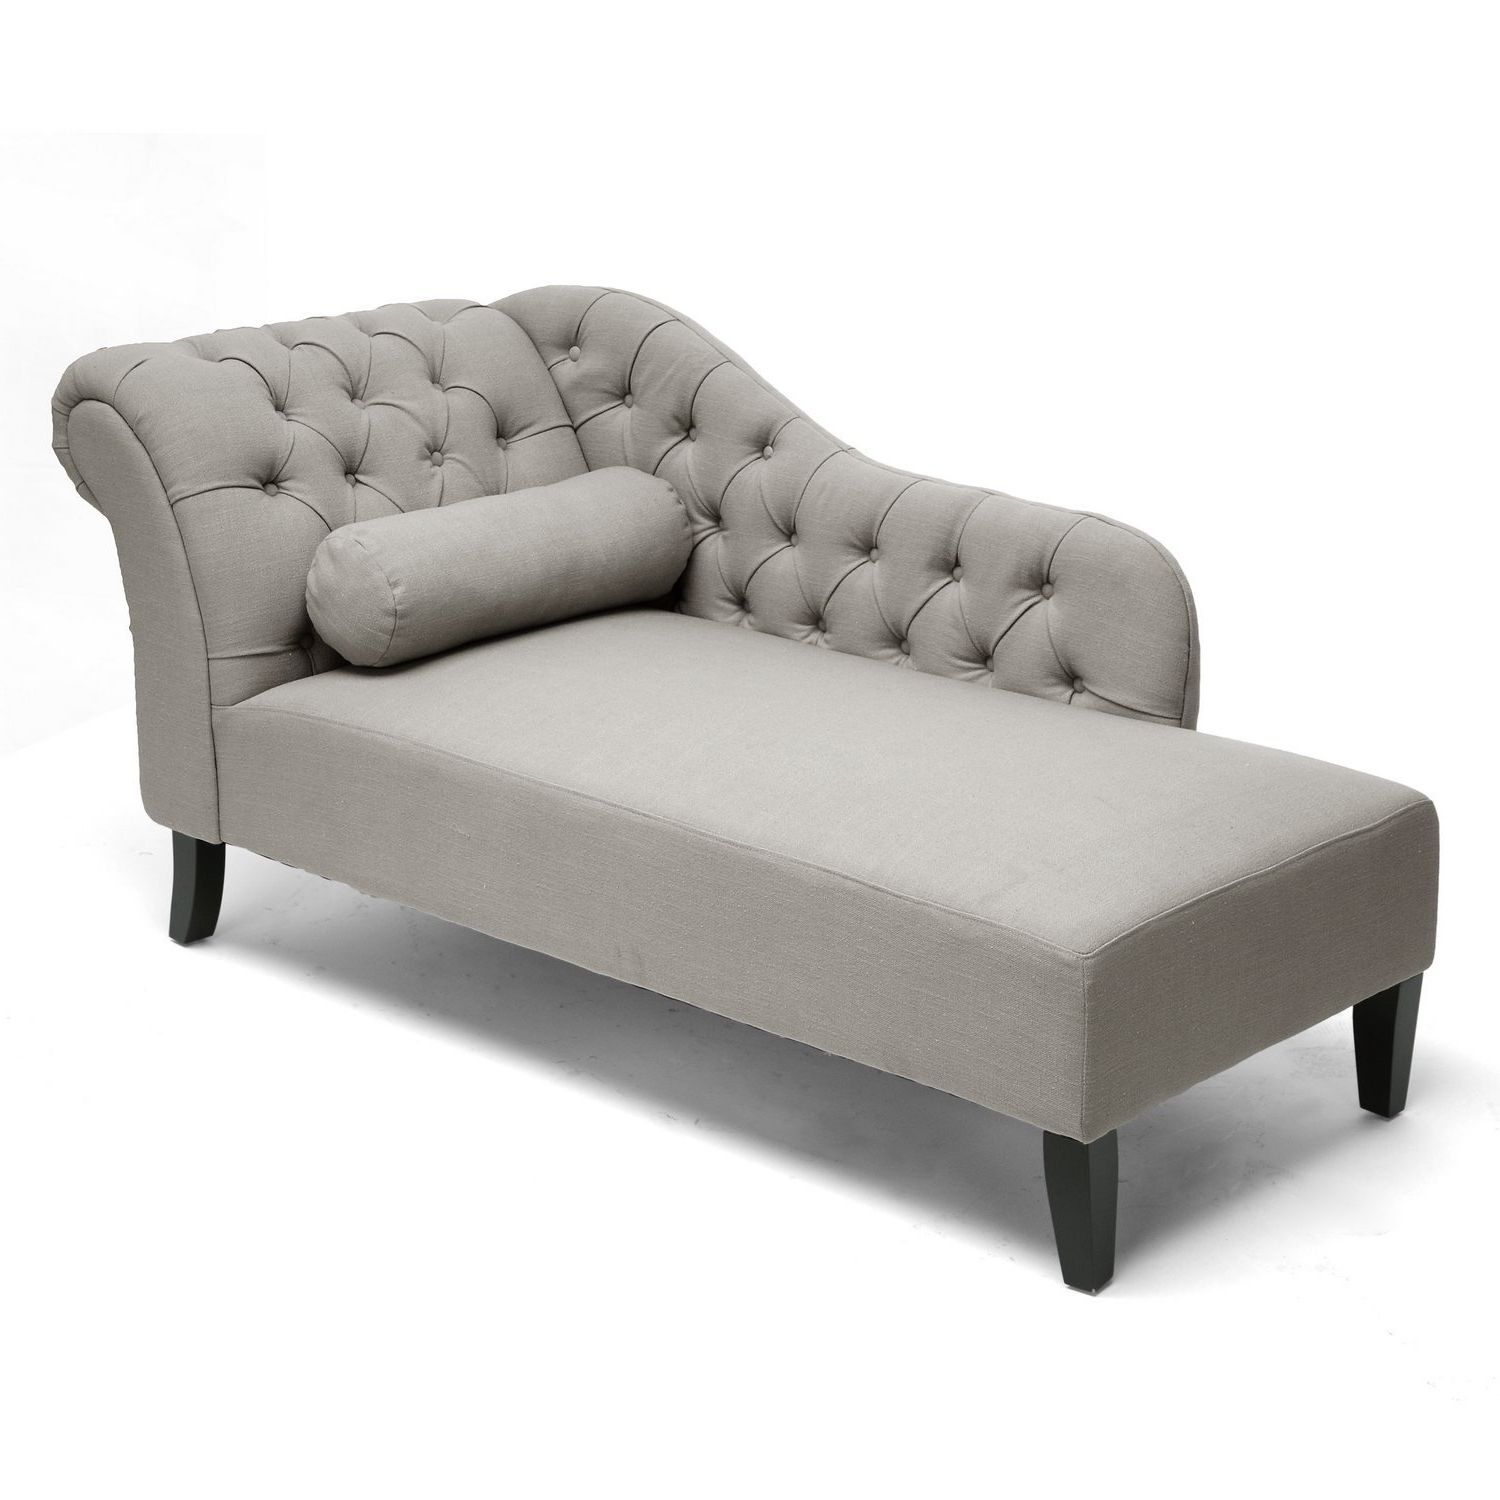 Amazon: Baxton Studio Aphrodite Tufted Putty Linen Modern Within 2017 Tufted Chaise Lounges (View 3 of 15)